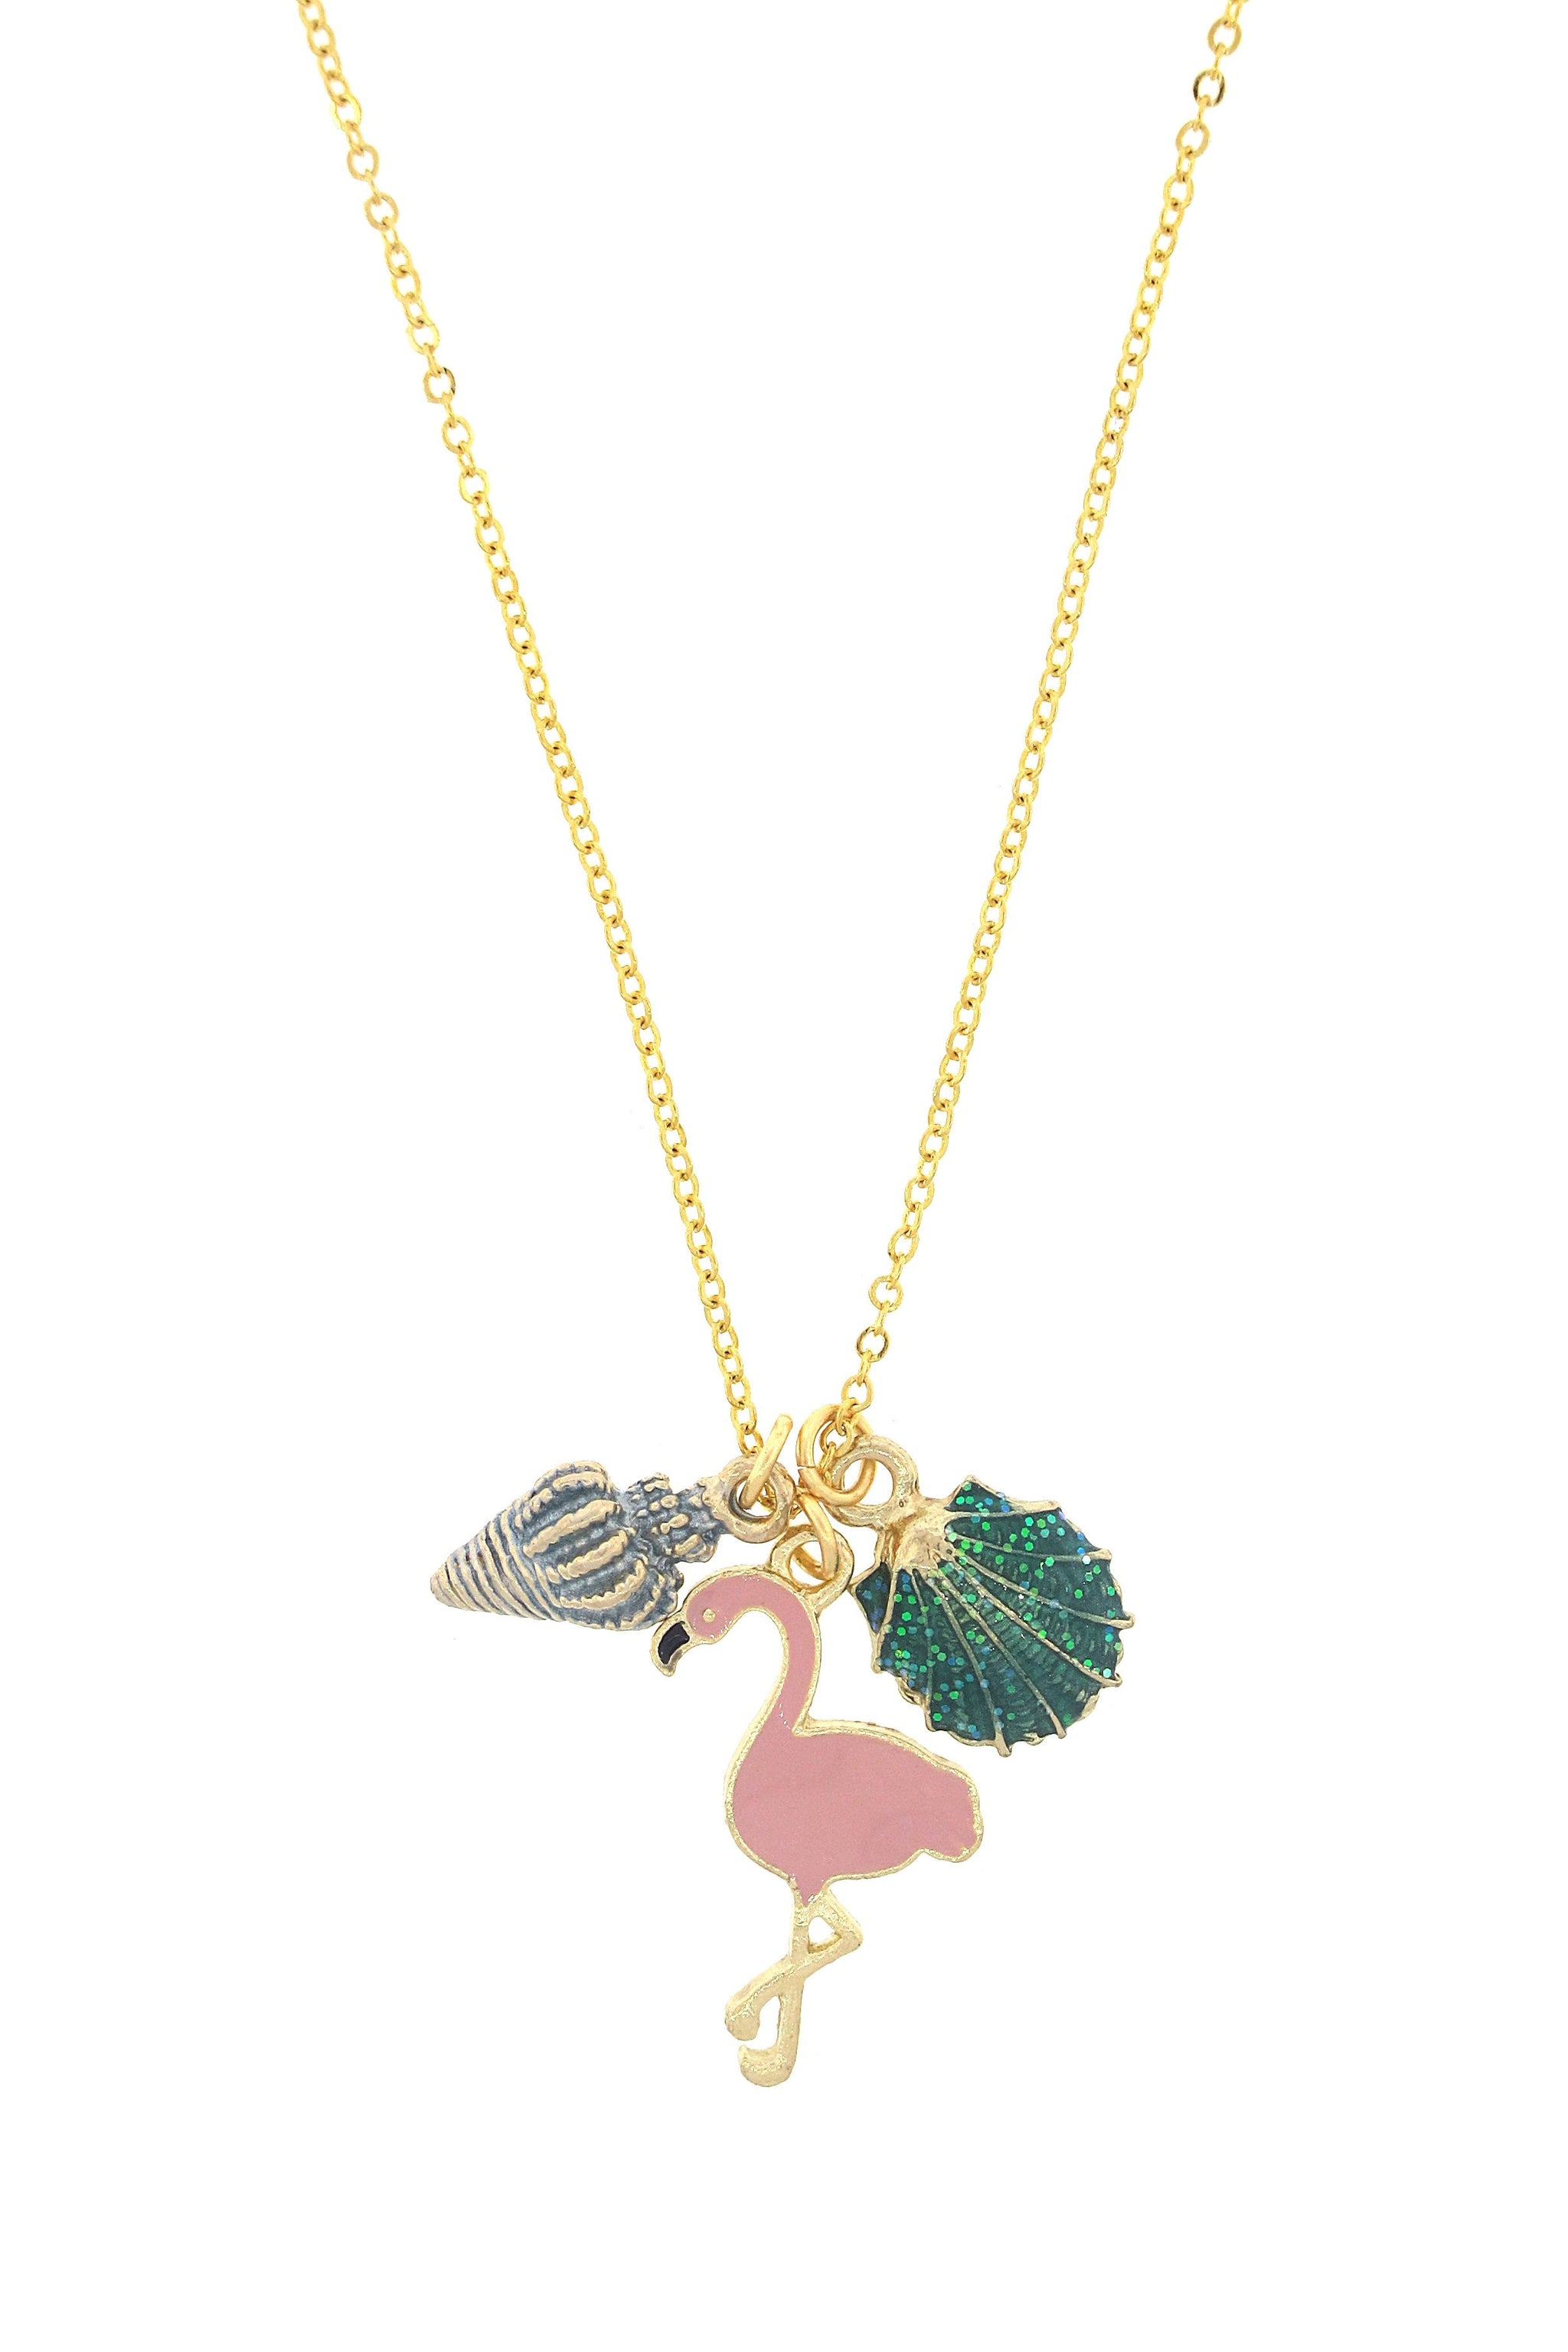 14K Solid Gold Flamingo Necklace With Turquoise Stone, Yellow Gold Bird  Pendant, Dainty Animal Necklace, Elegant Gift for Her, Gift for Her - Etsy